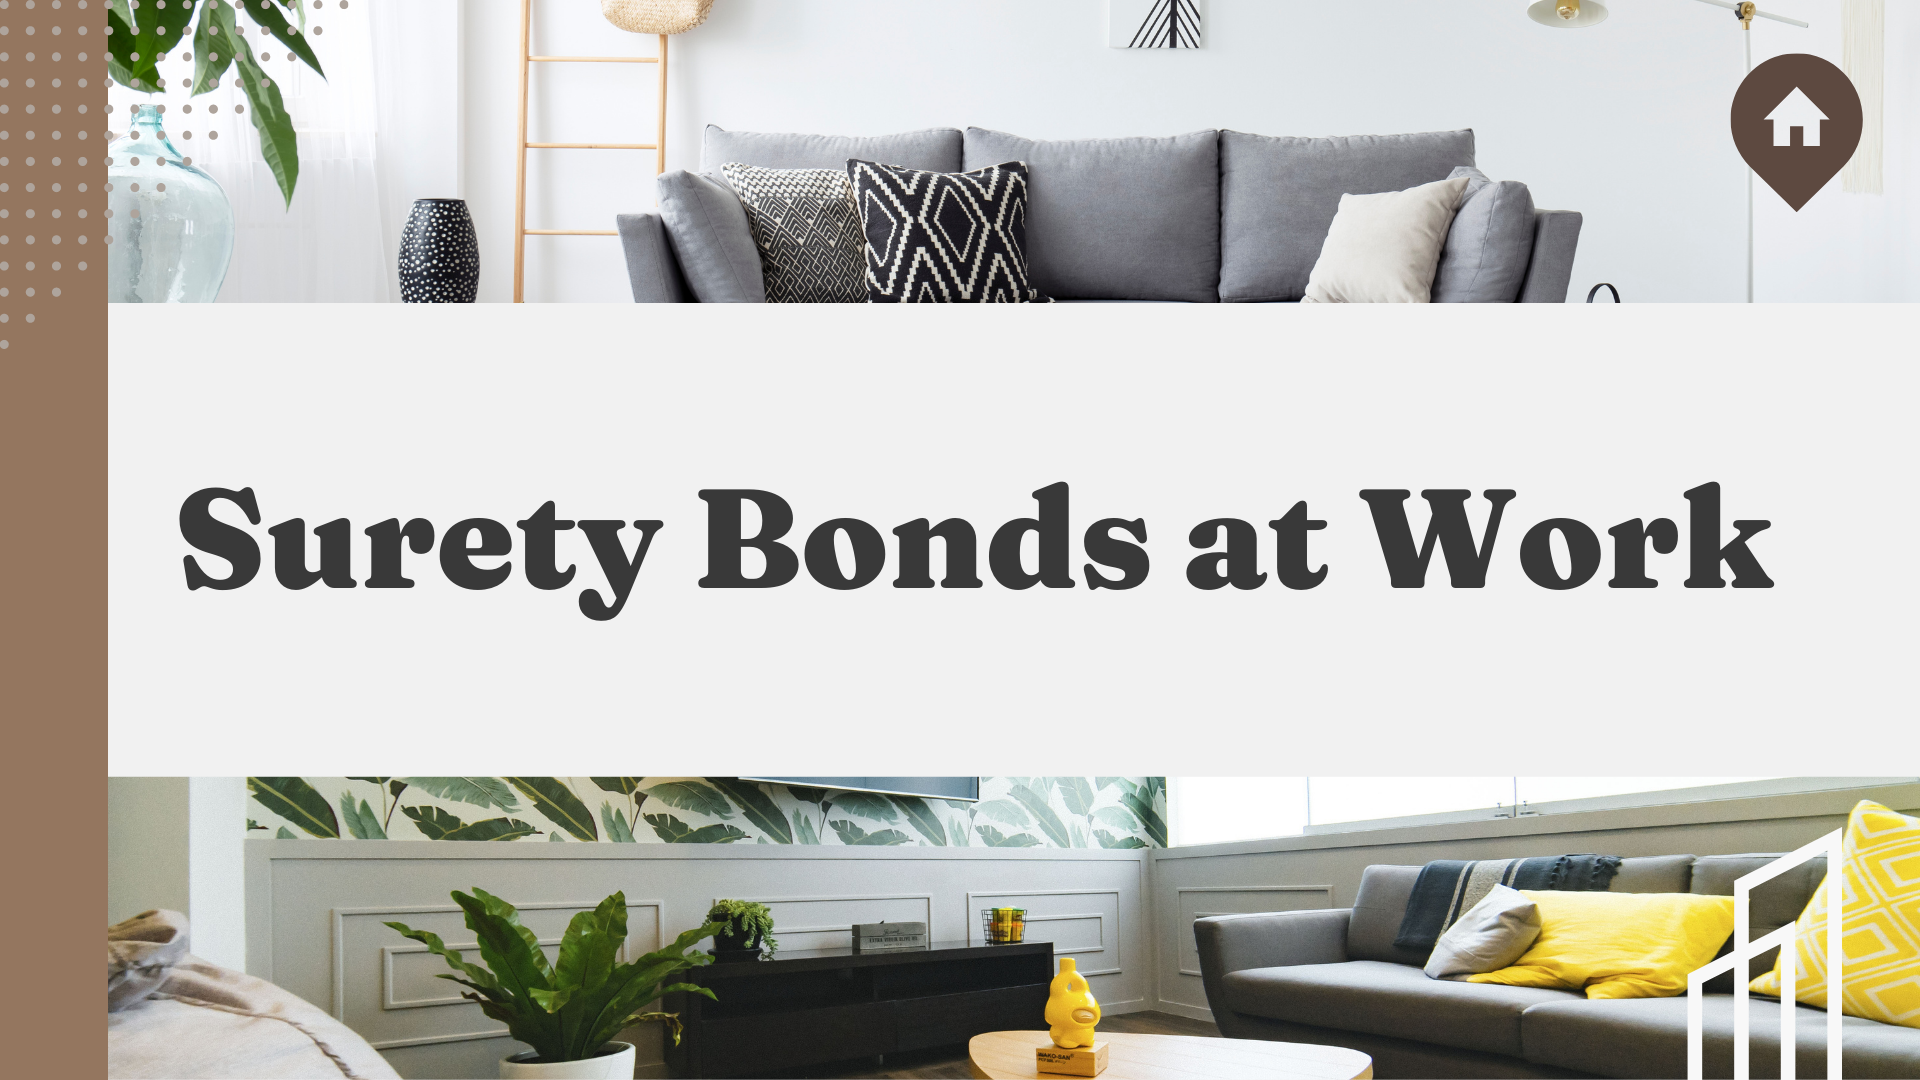 surety bond - Why is the employer asking if I’m covered by a surety bond - living area